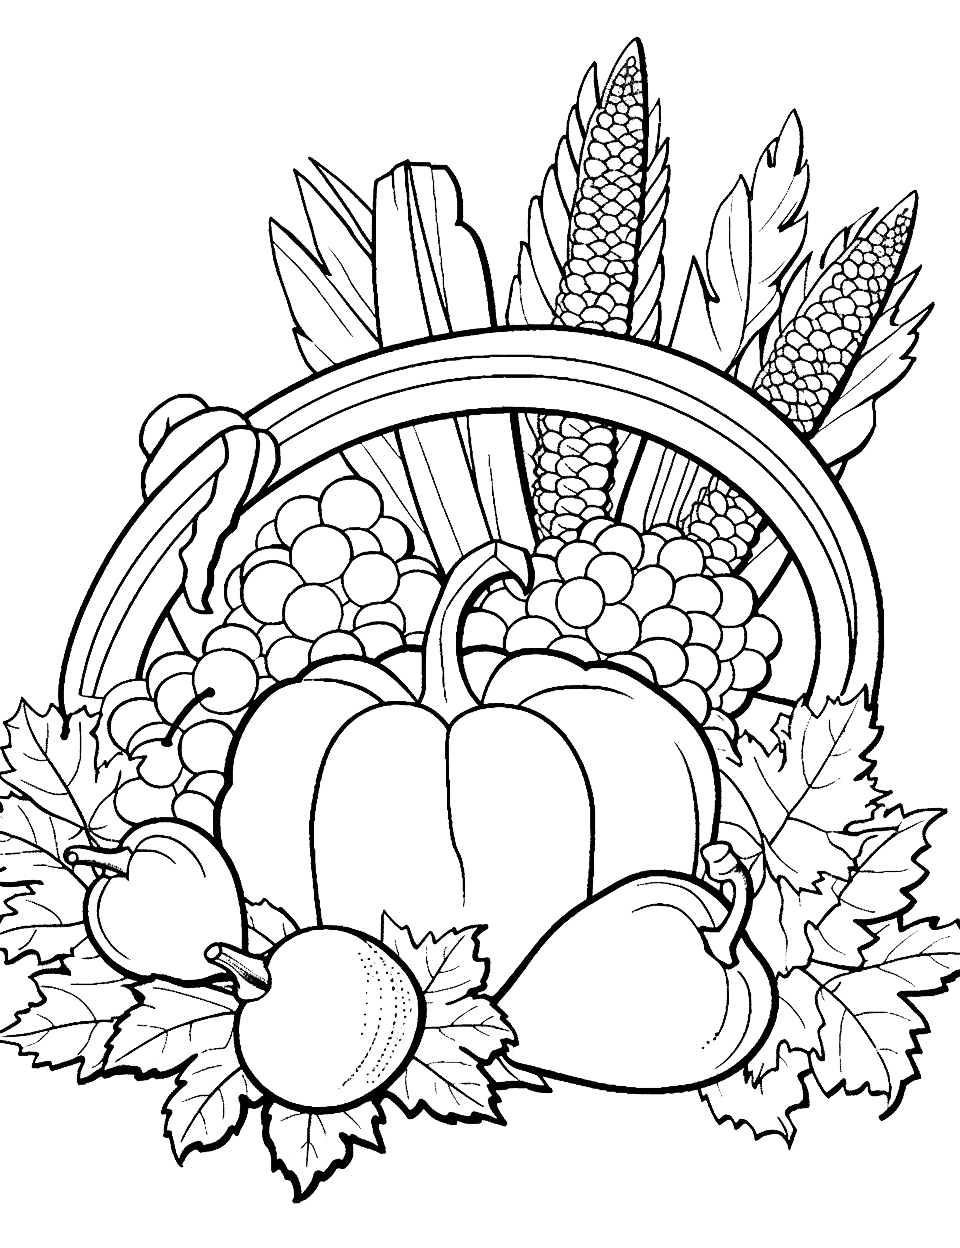 Colorful Cornucopia Thanksgiving Coloring Page - A cornucopia scene that teaches about different fruits and vegetables.